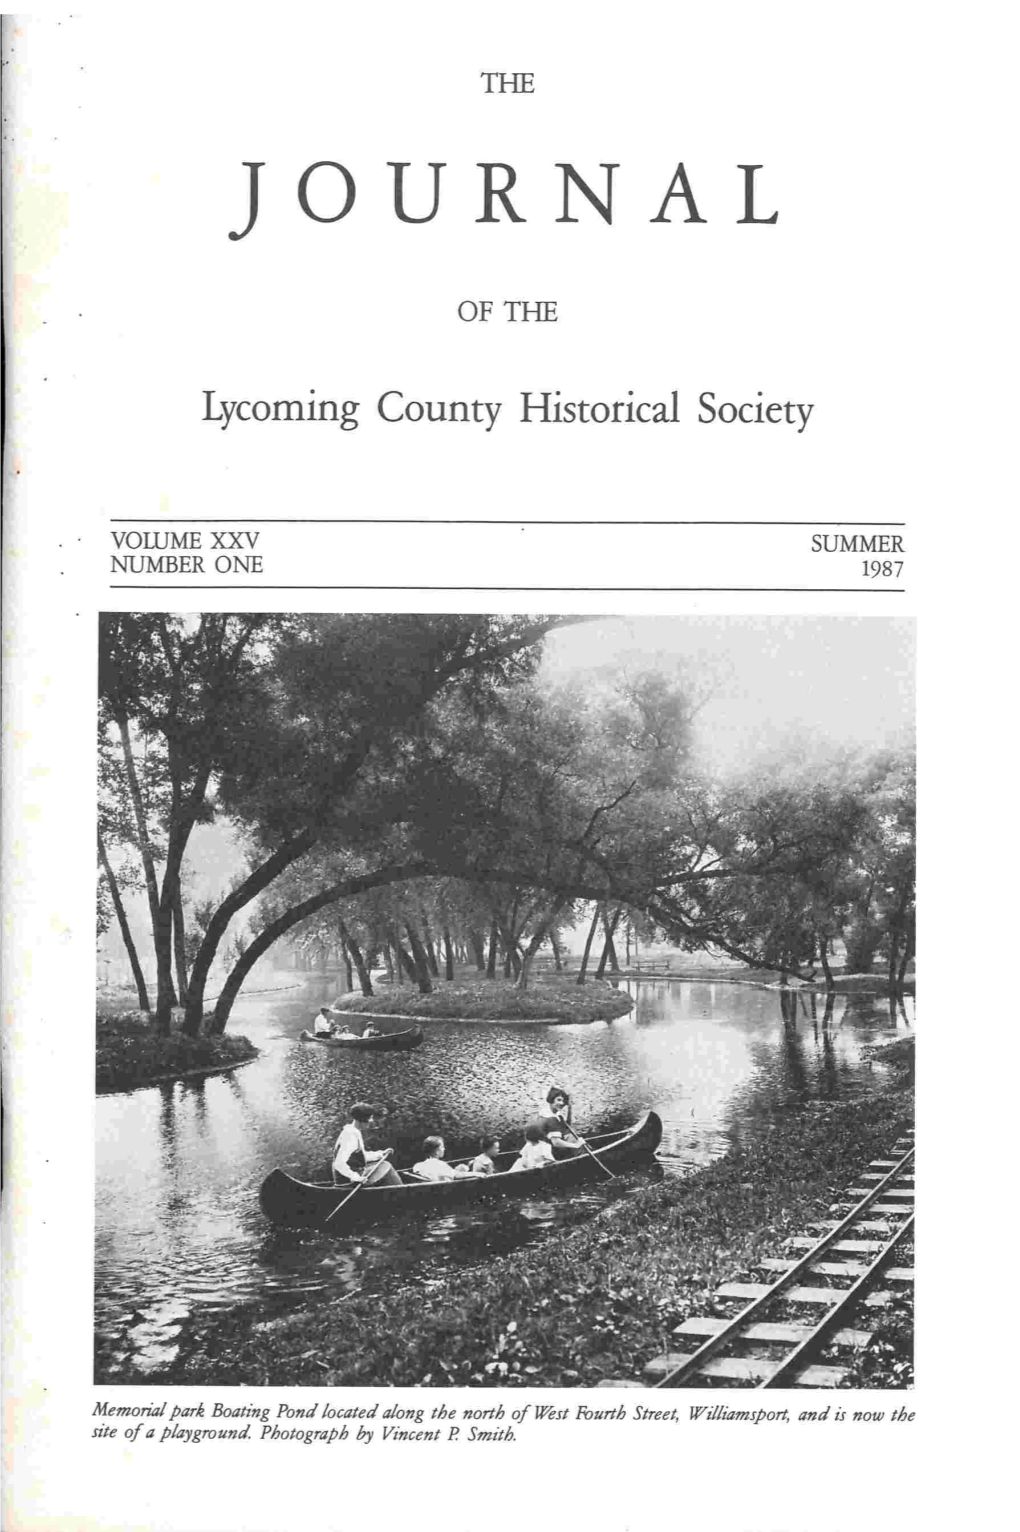 Journal of the Lycoming County Historical Society, Summer 1987